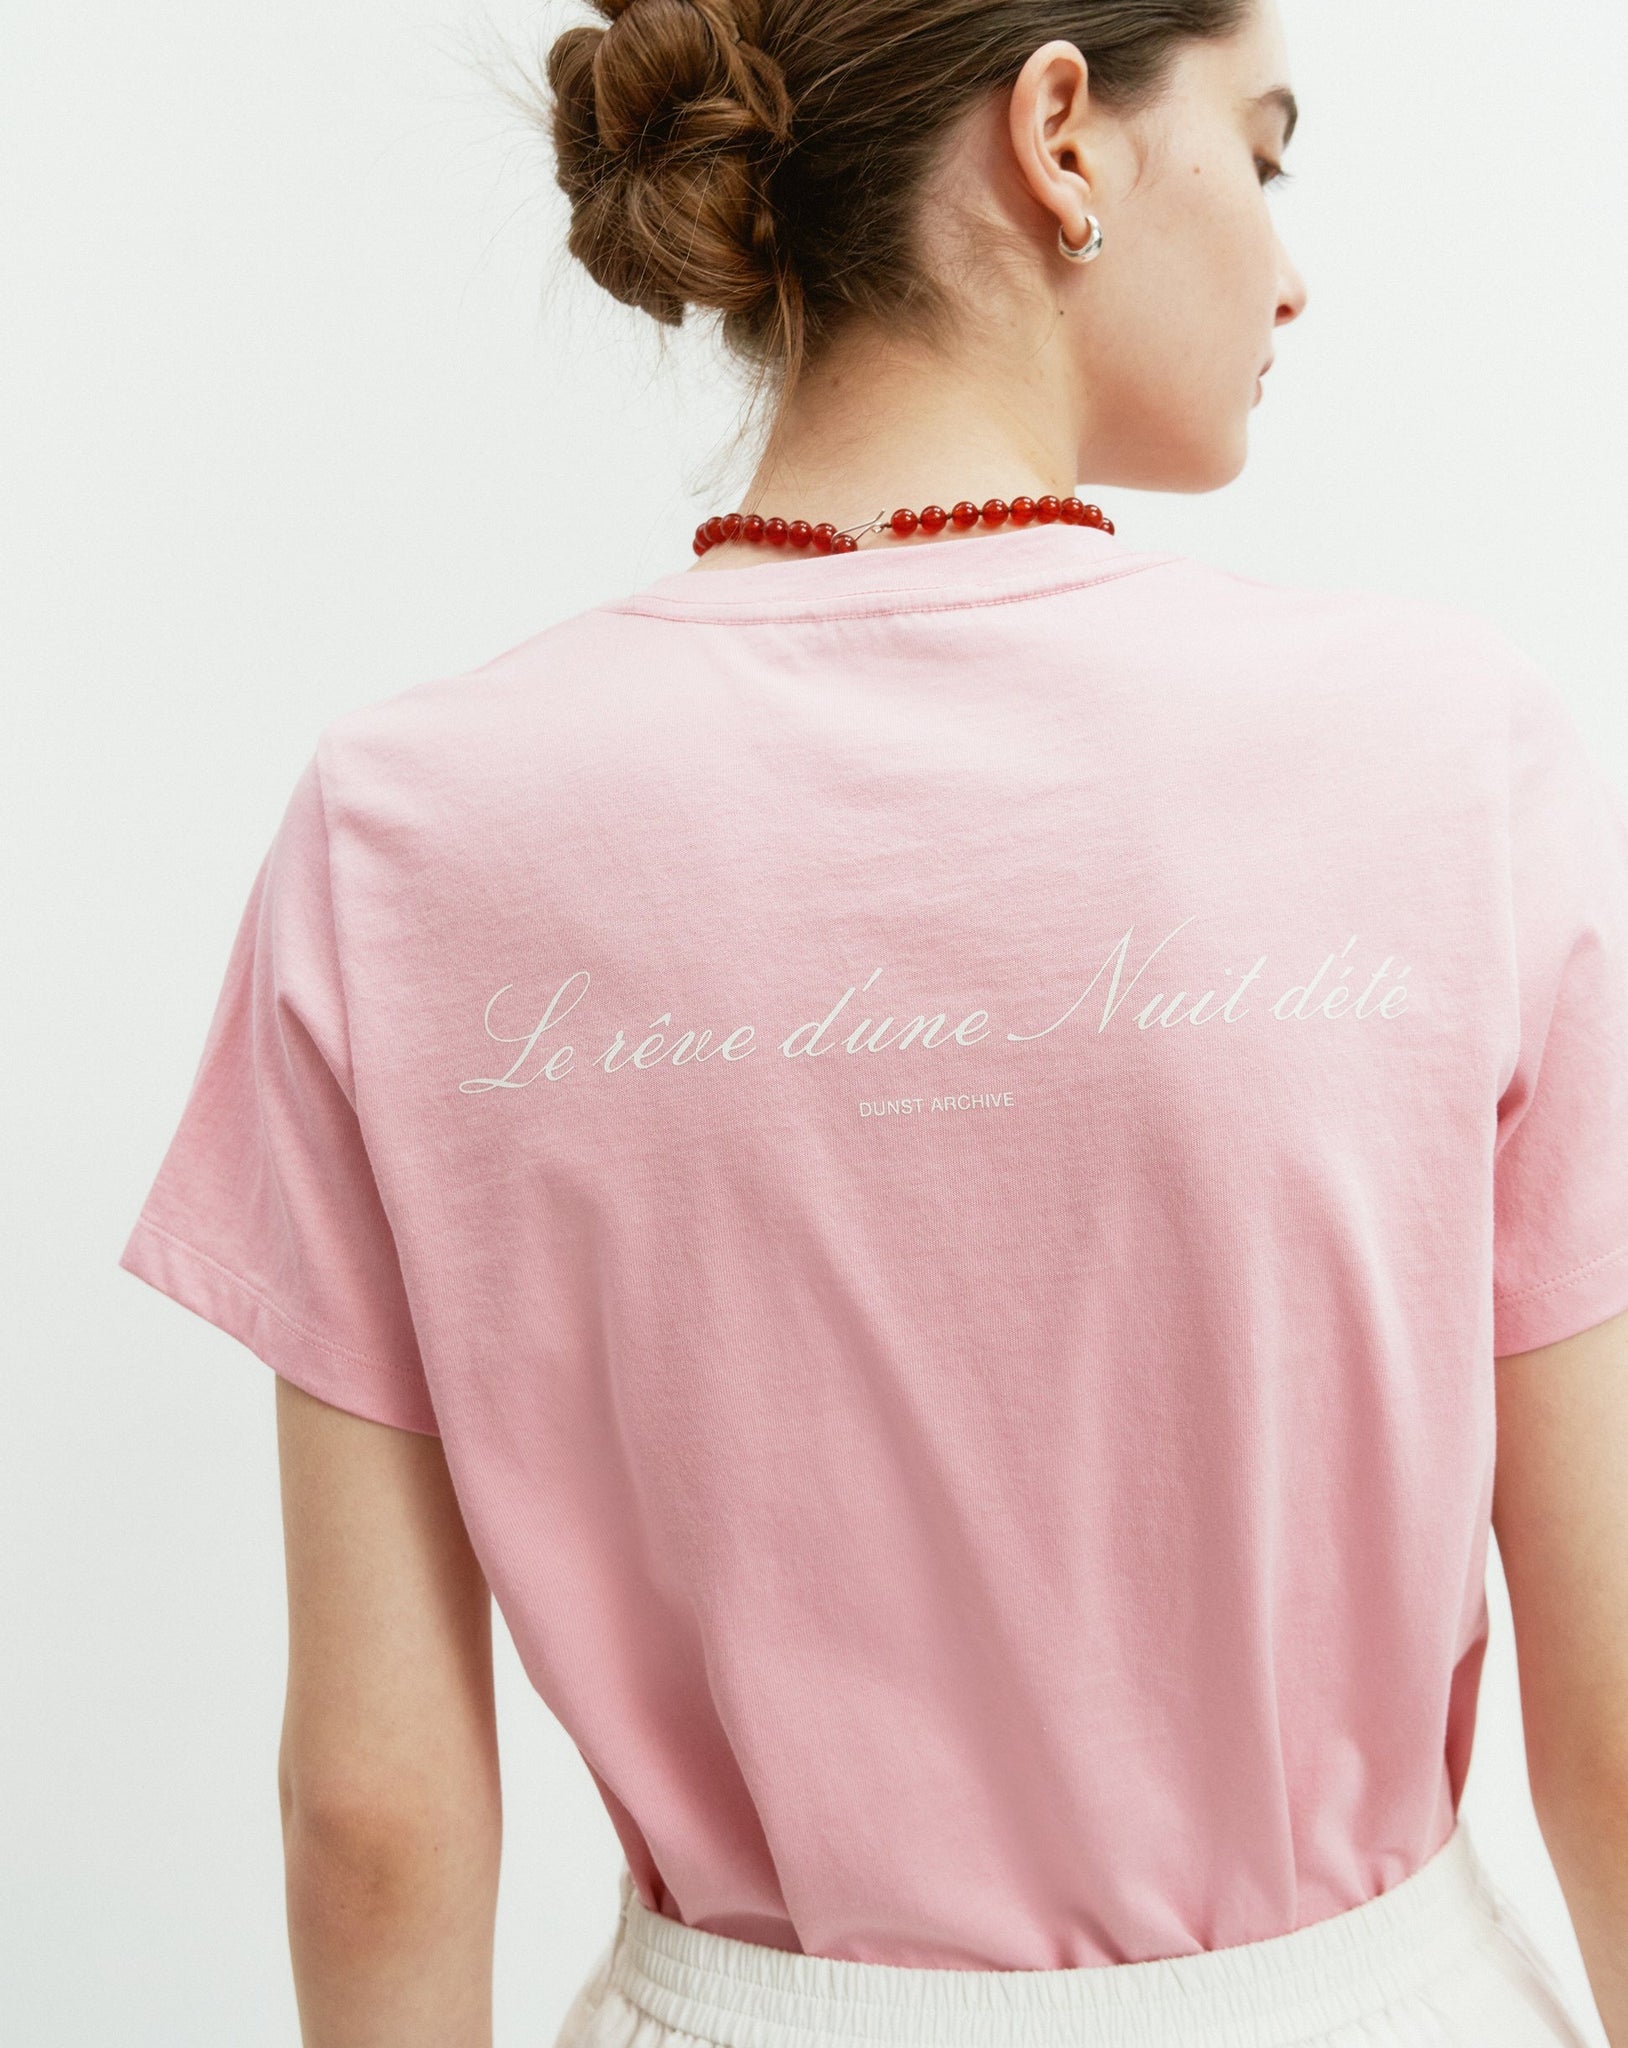 T-shirt by Dunst